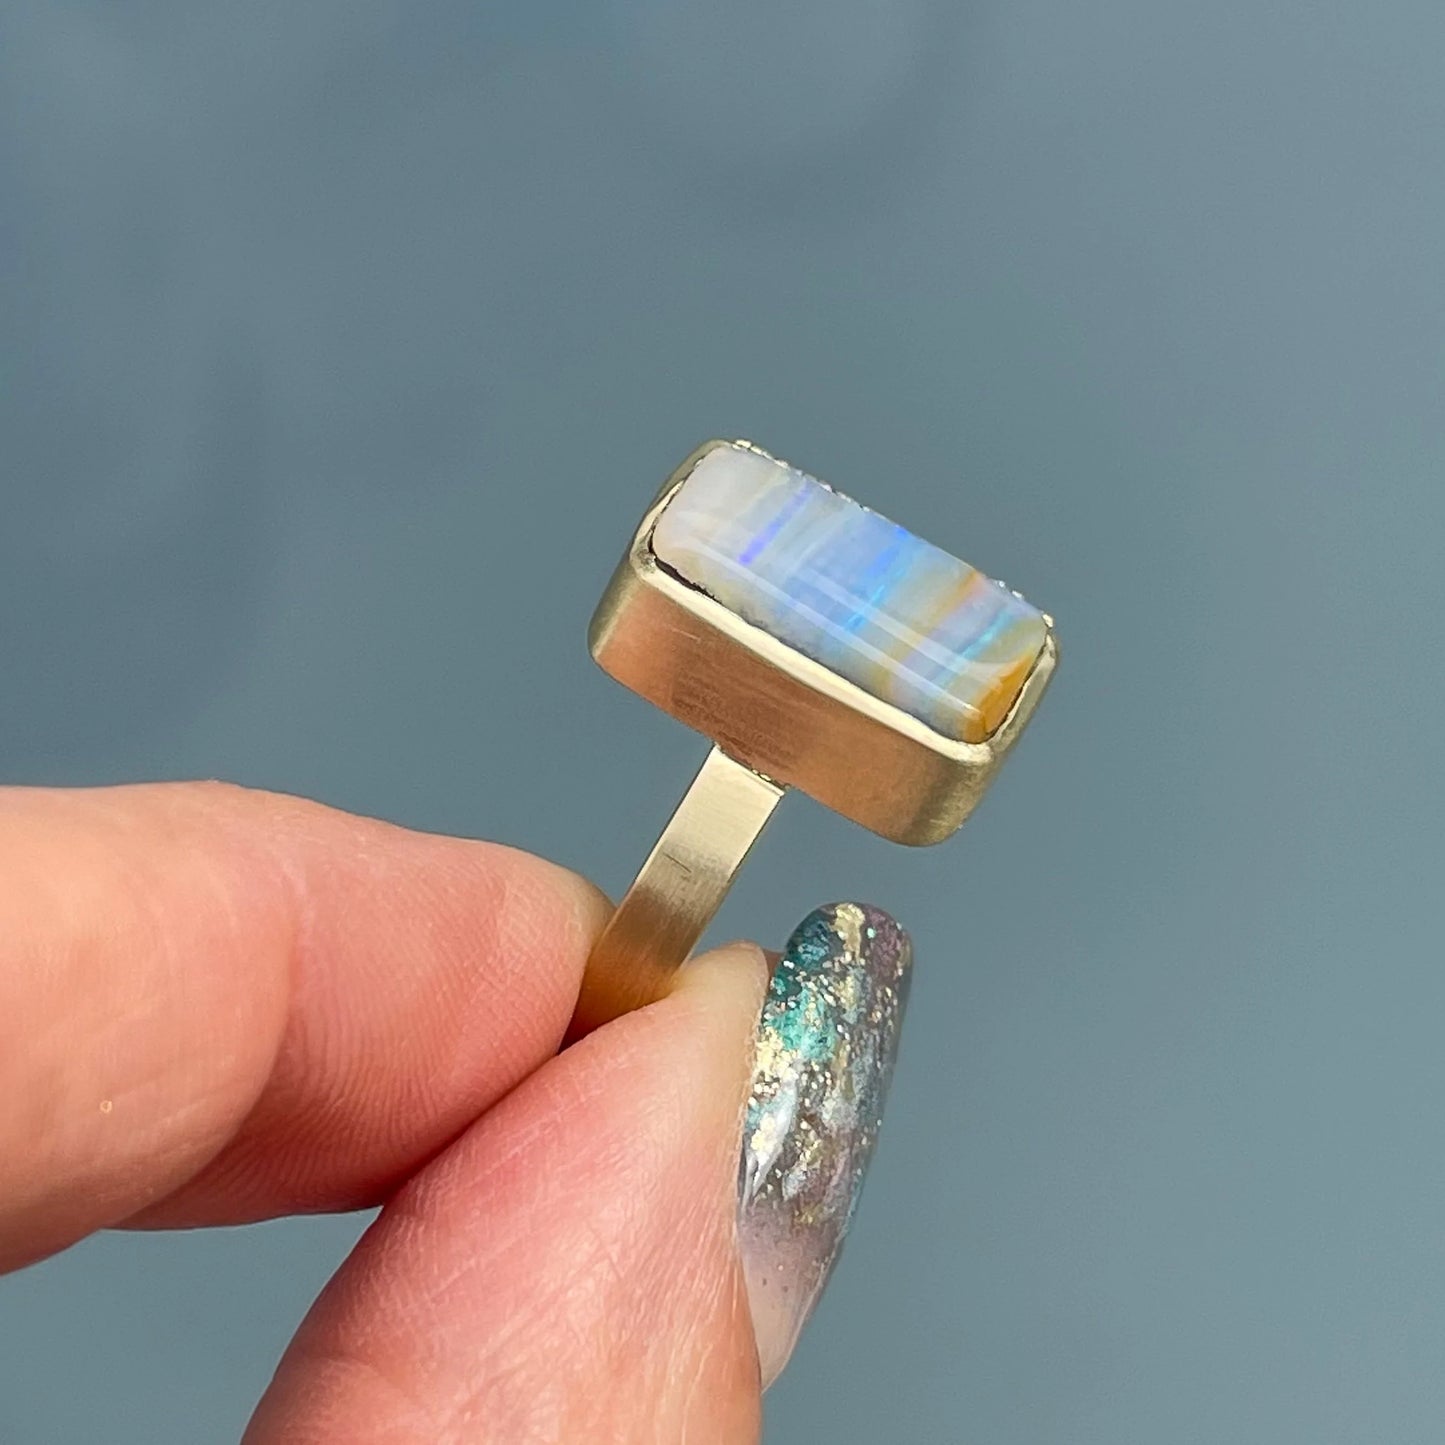 An Australian Opal Ring by NIXIN Jewelry with a Boulder Opal set in yellow gold is held to show the side of its bezel setting.